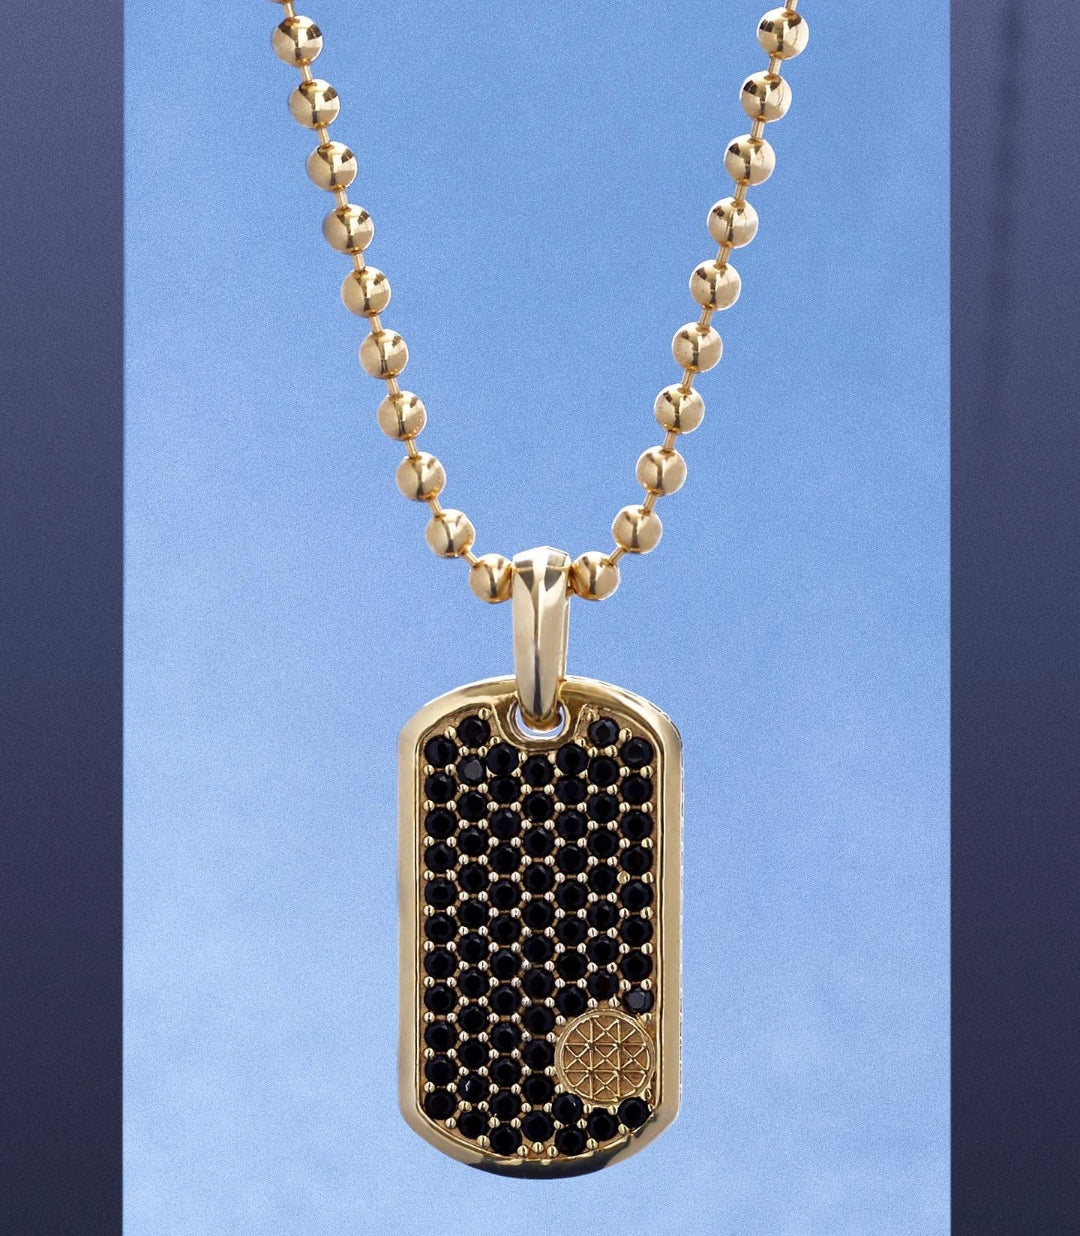 RARE PRINCE by CARAT SUTRA | Unique Designed Paved Tag Pendant Studded with Black Zircons | 22kt Gold Micron Plated 925 Sterling Silver Pendant | Men's Jewelry | With Certificate of Authenticity and 925 Hallmark - caratsutra